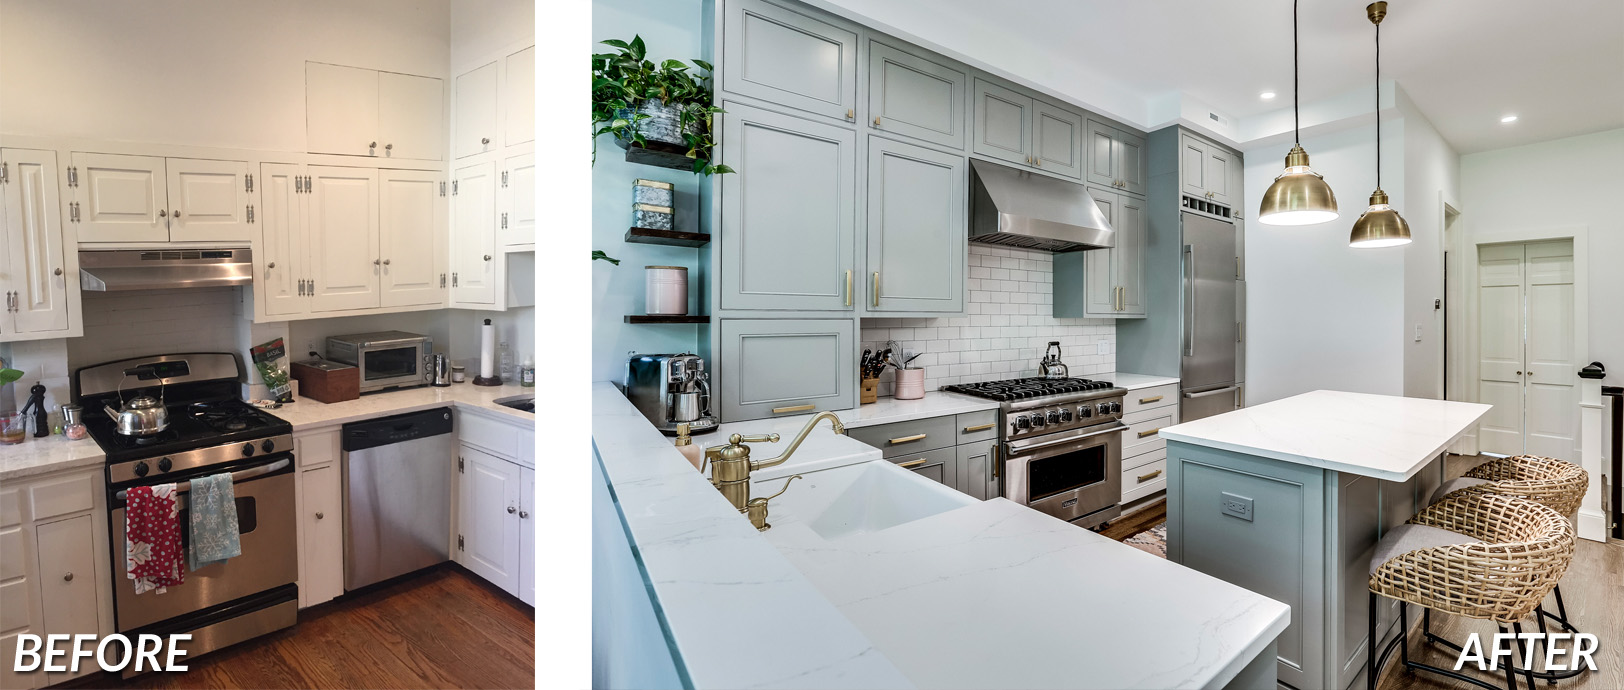 Georgetown Kitchen Renovation Before & After